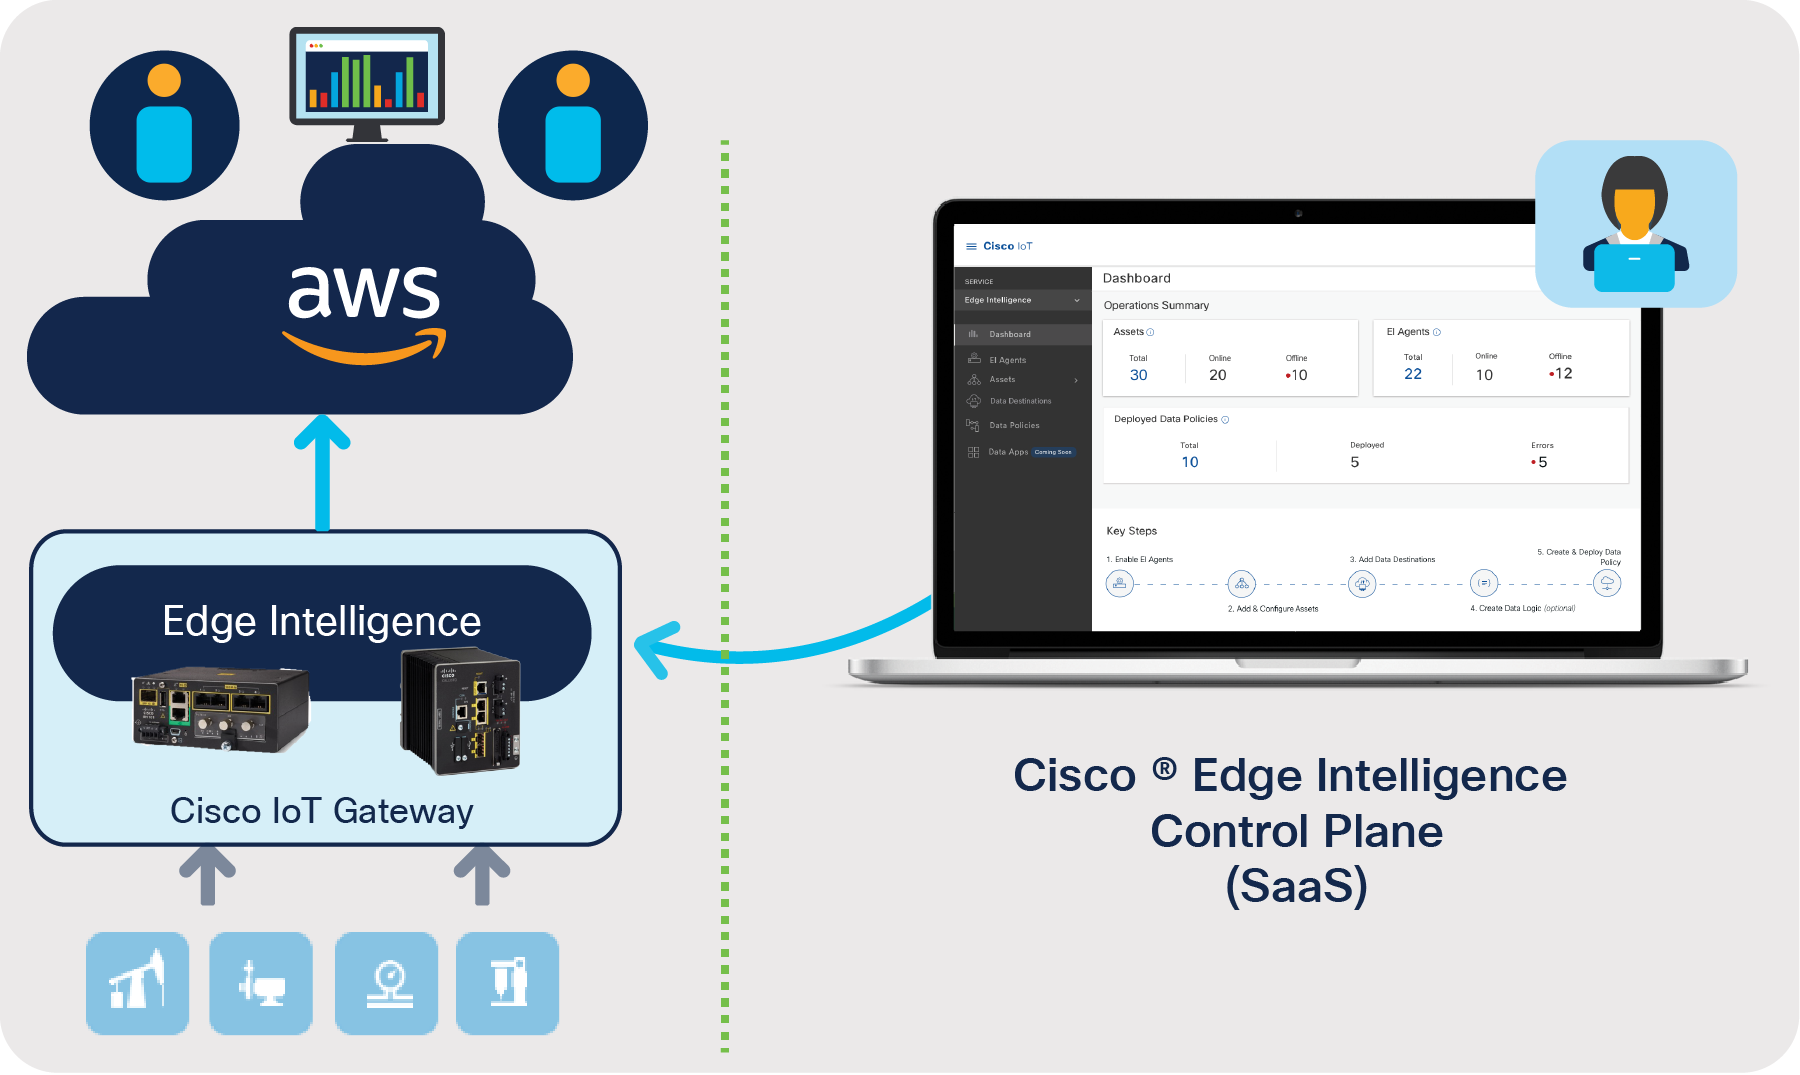 Cisco Edge Intelligence seamlessly integrates with AWS IoT Core